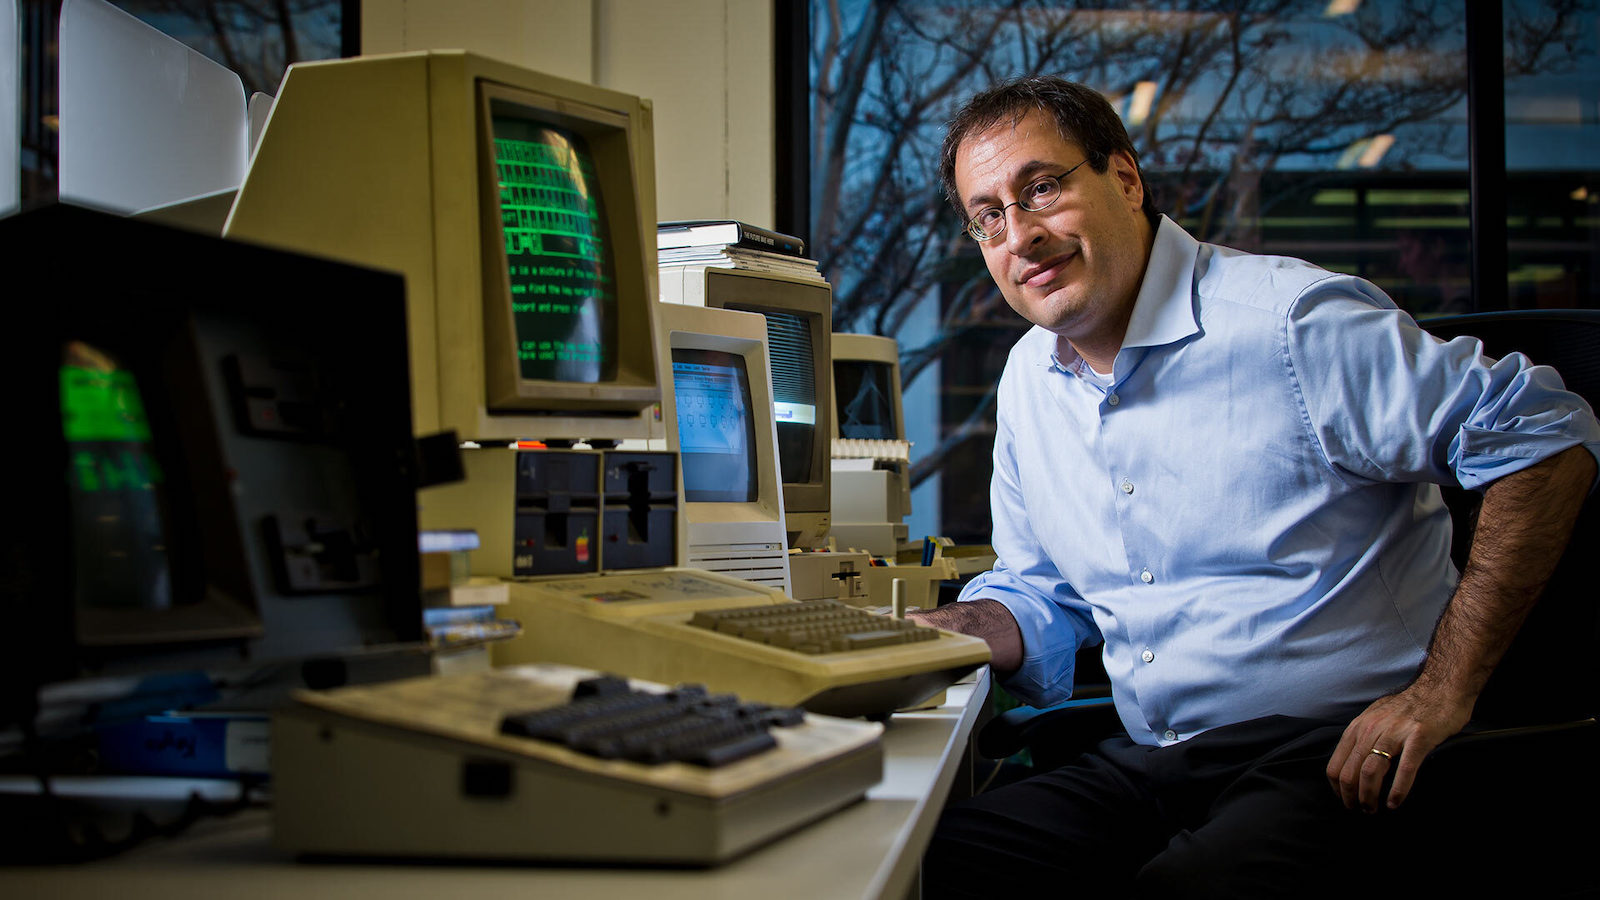 Matthew Kirschenbaum, a professor of English and digital studies at the University of Maryland, poses with some of the vintage PCs and word processing machines he uses to access old computer file formats. 